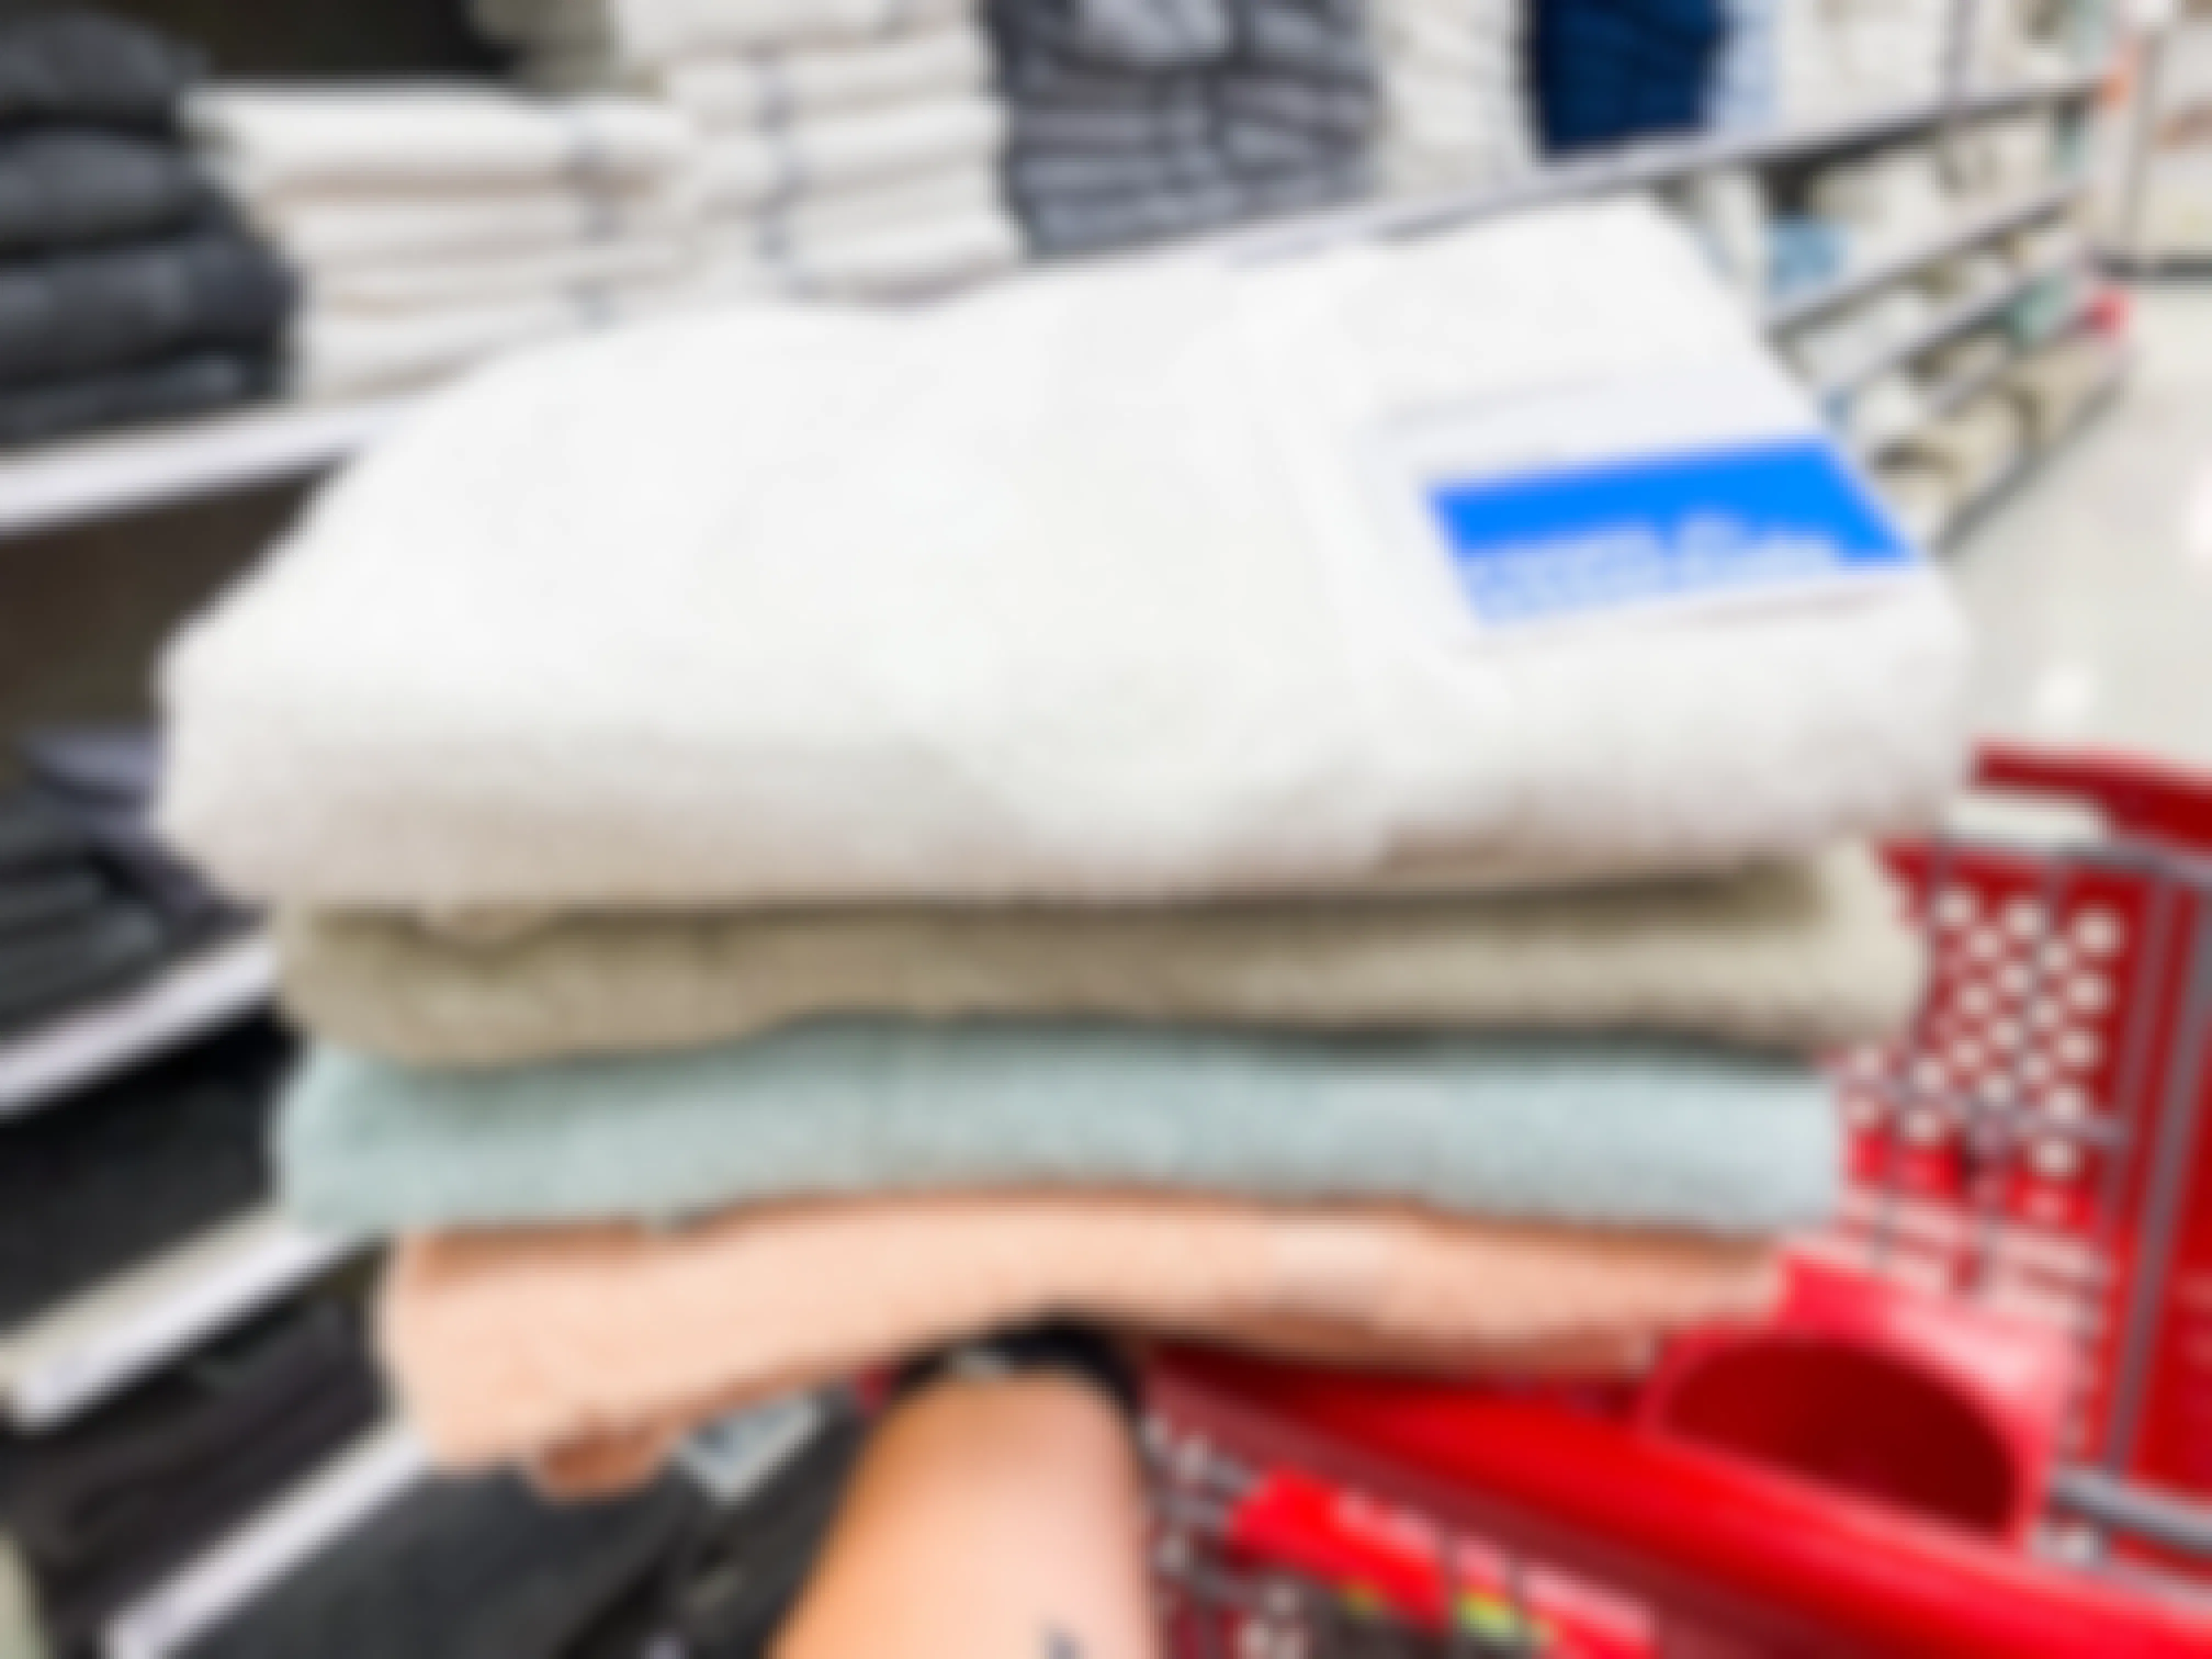 A person holding four Room Essentials bath towels next to a target shopping cart